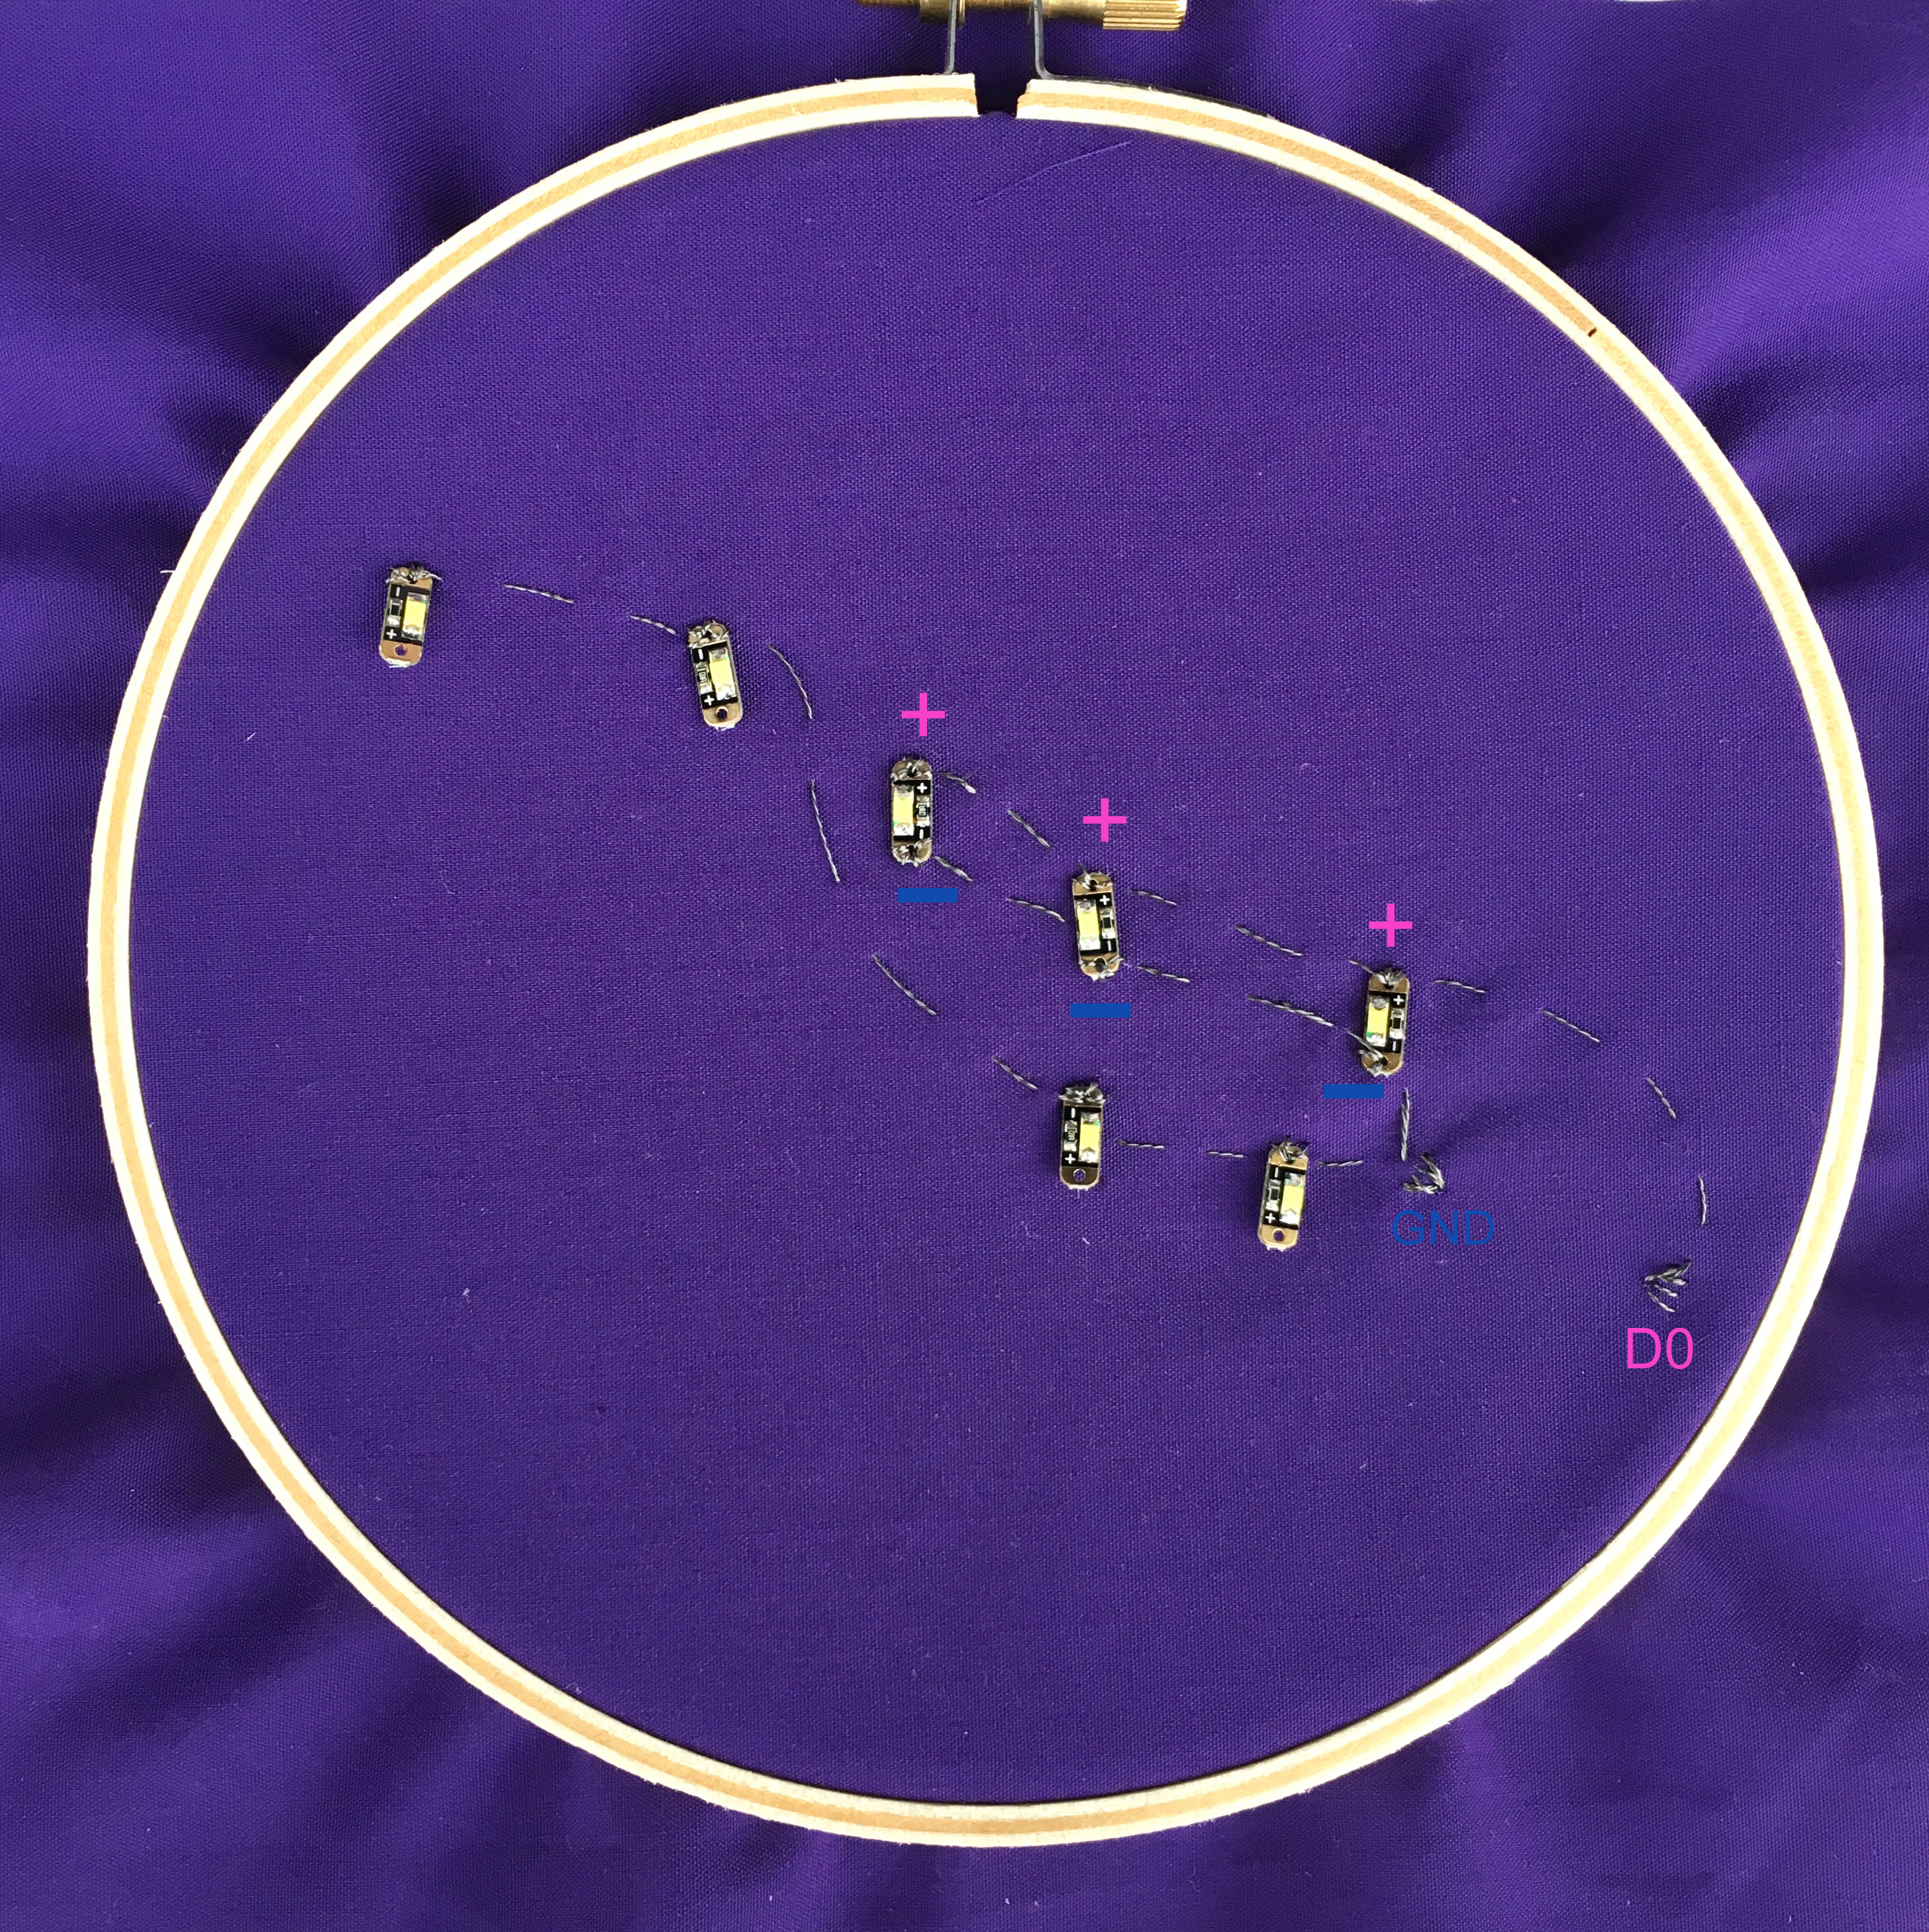 Embroidery roadmap: positive terminals